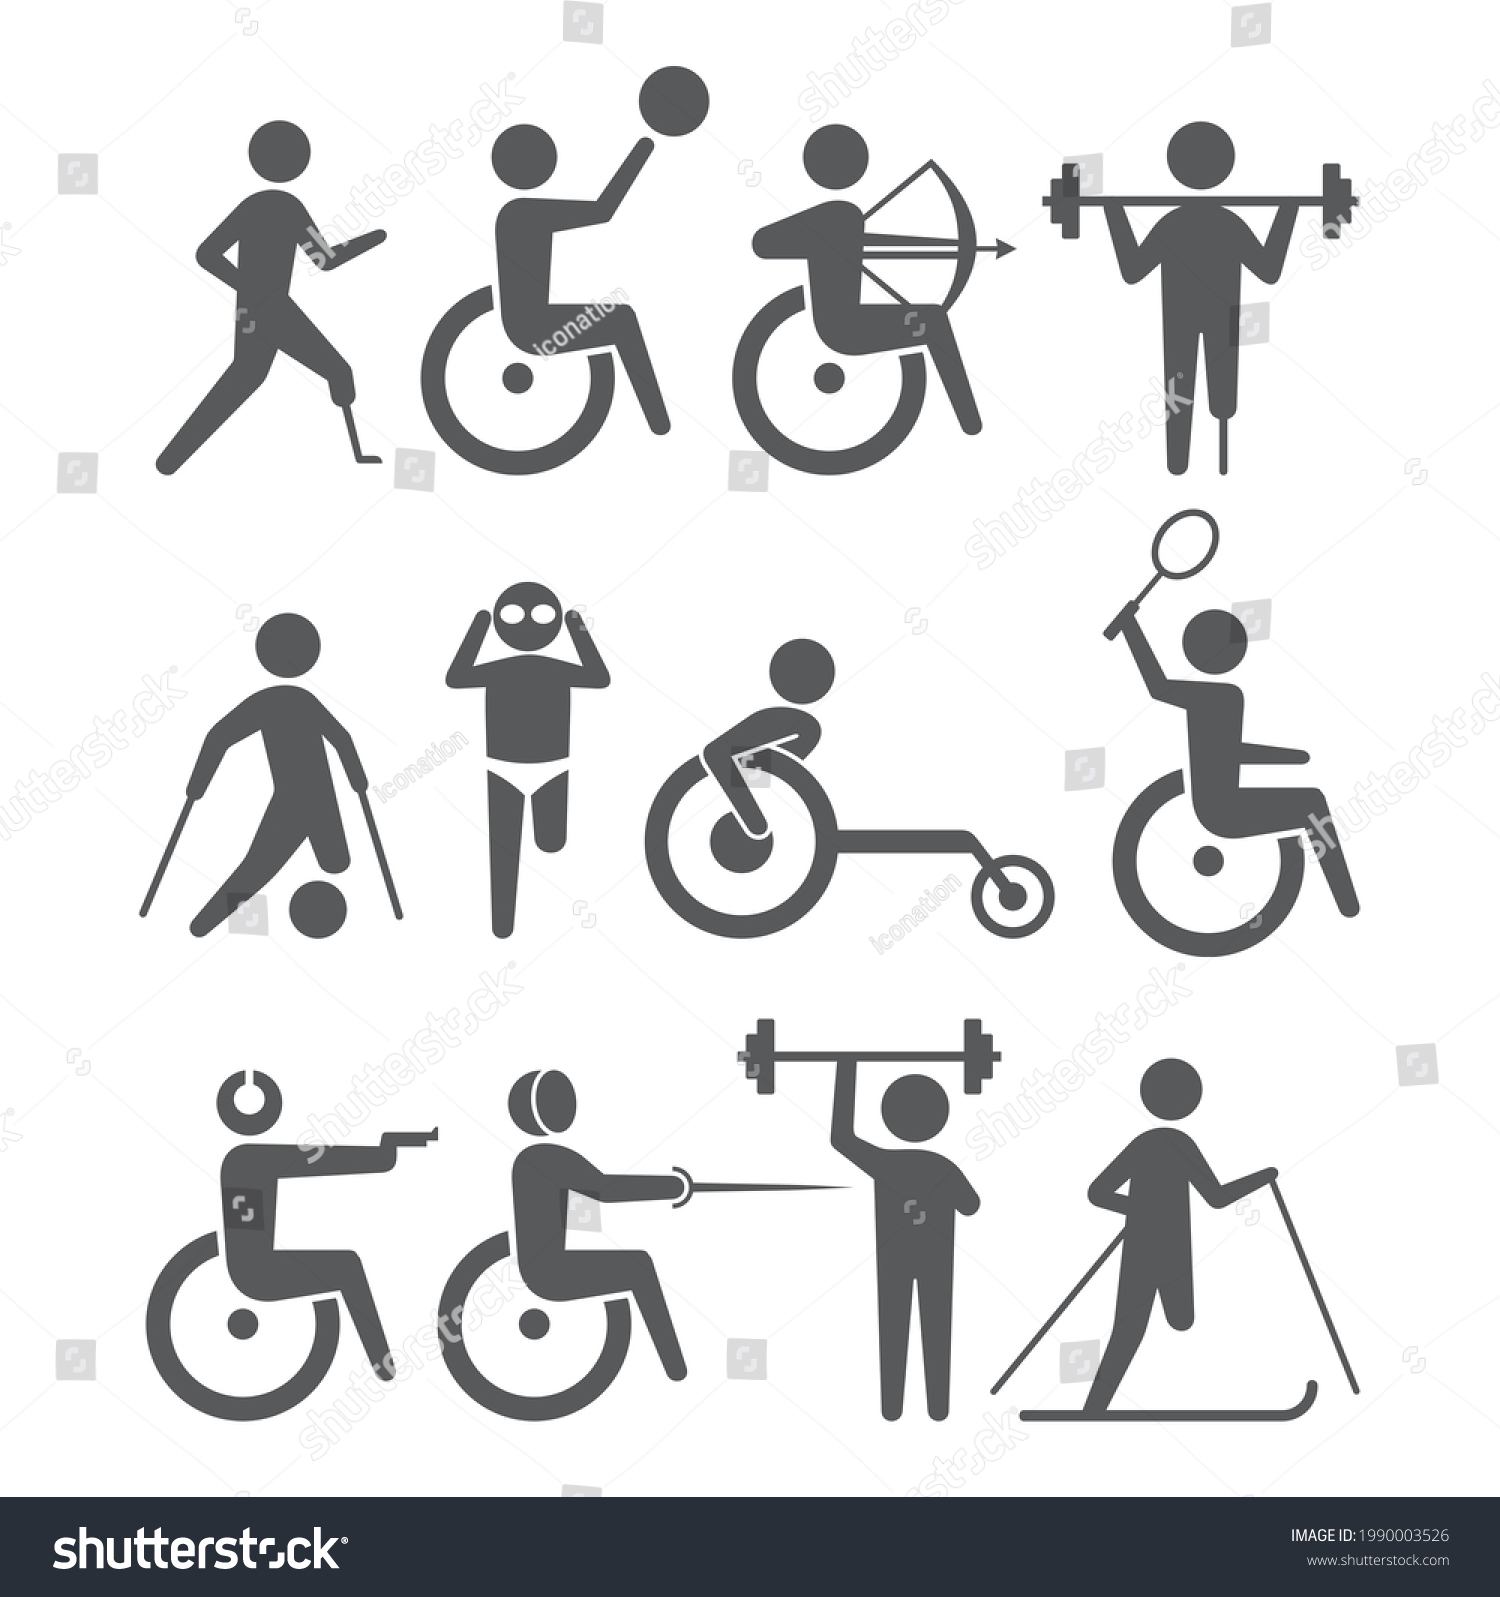 SVG of a collections of Athletics disabled icon, vector art. svg